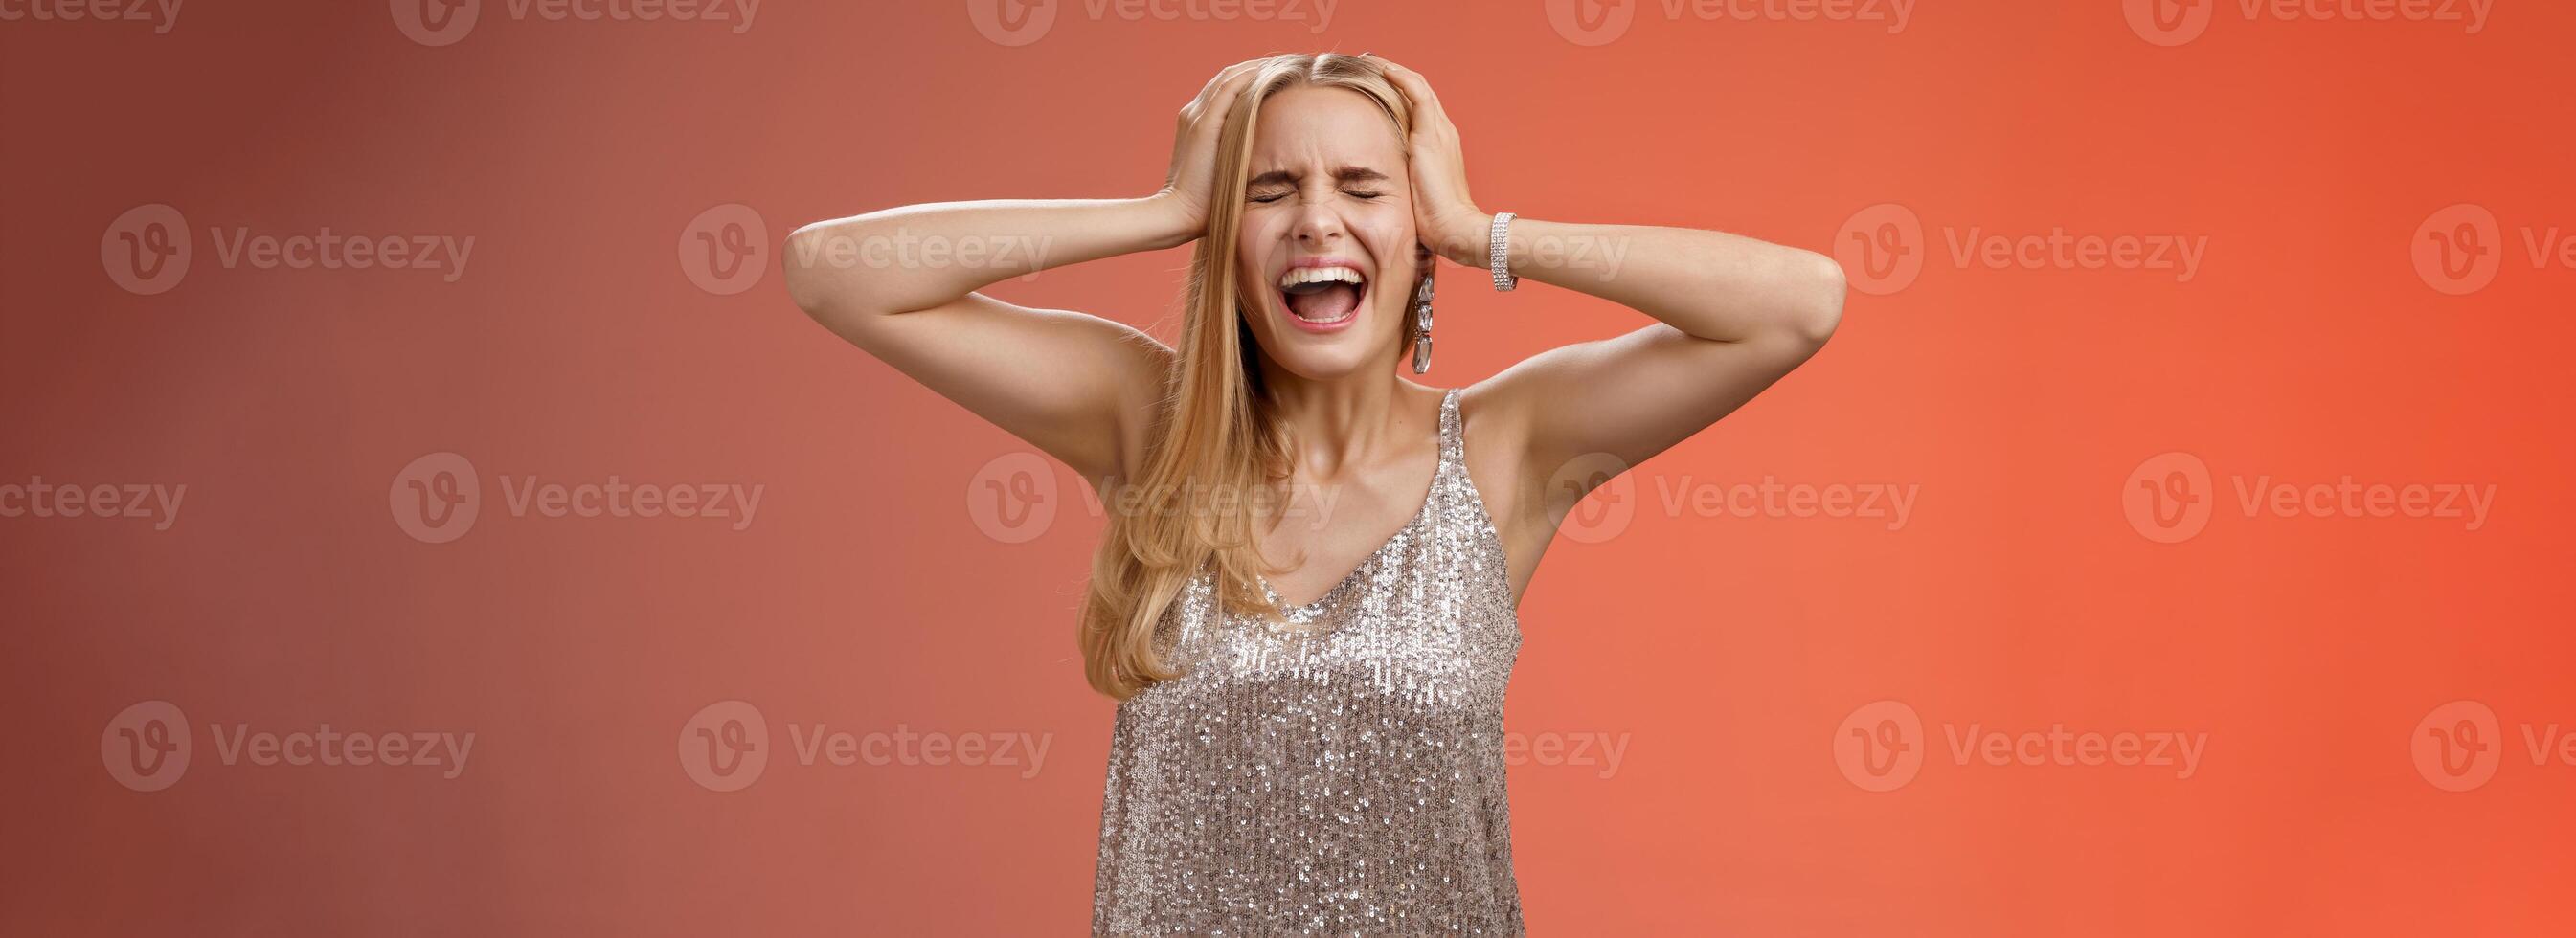 Upset distressed pressured fed up panicking young blond woman in dress scream cry heart out being heartbroken close eyes hold hands head mentaly unstable standing sad depressed red background photo